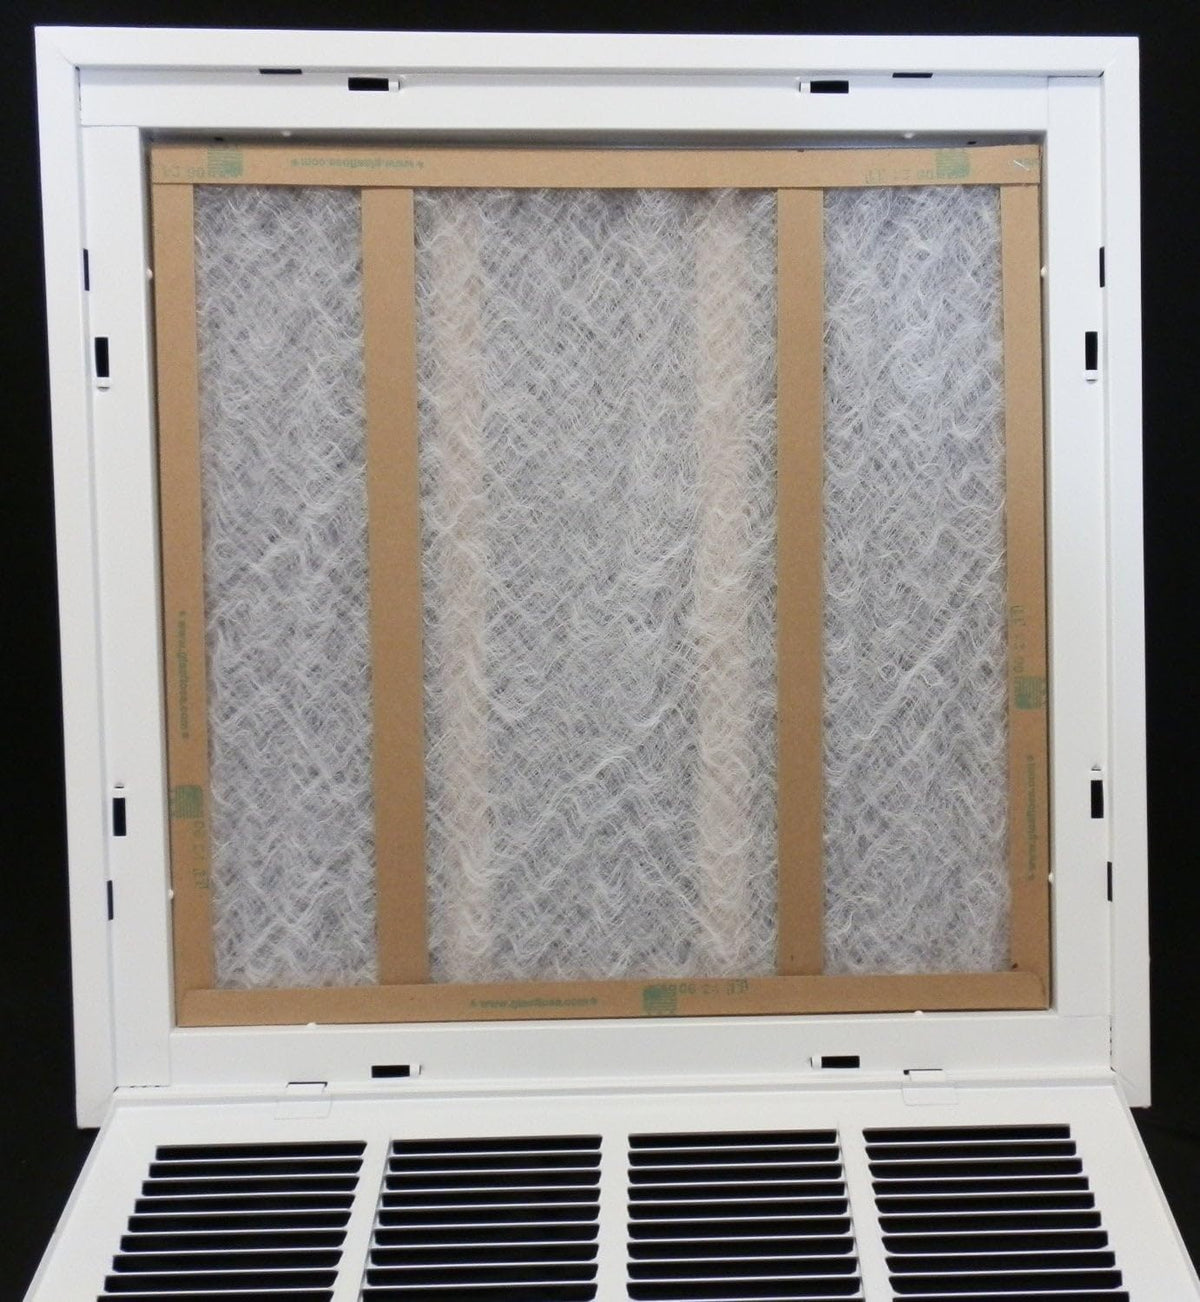 16&quot; X 8&quot; Steel Return Air Filter Grille for 1&quot; Filter - Removable Frame - [Outer Dimensions: 18 5/8&quot; X 10 5/8&quot;]